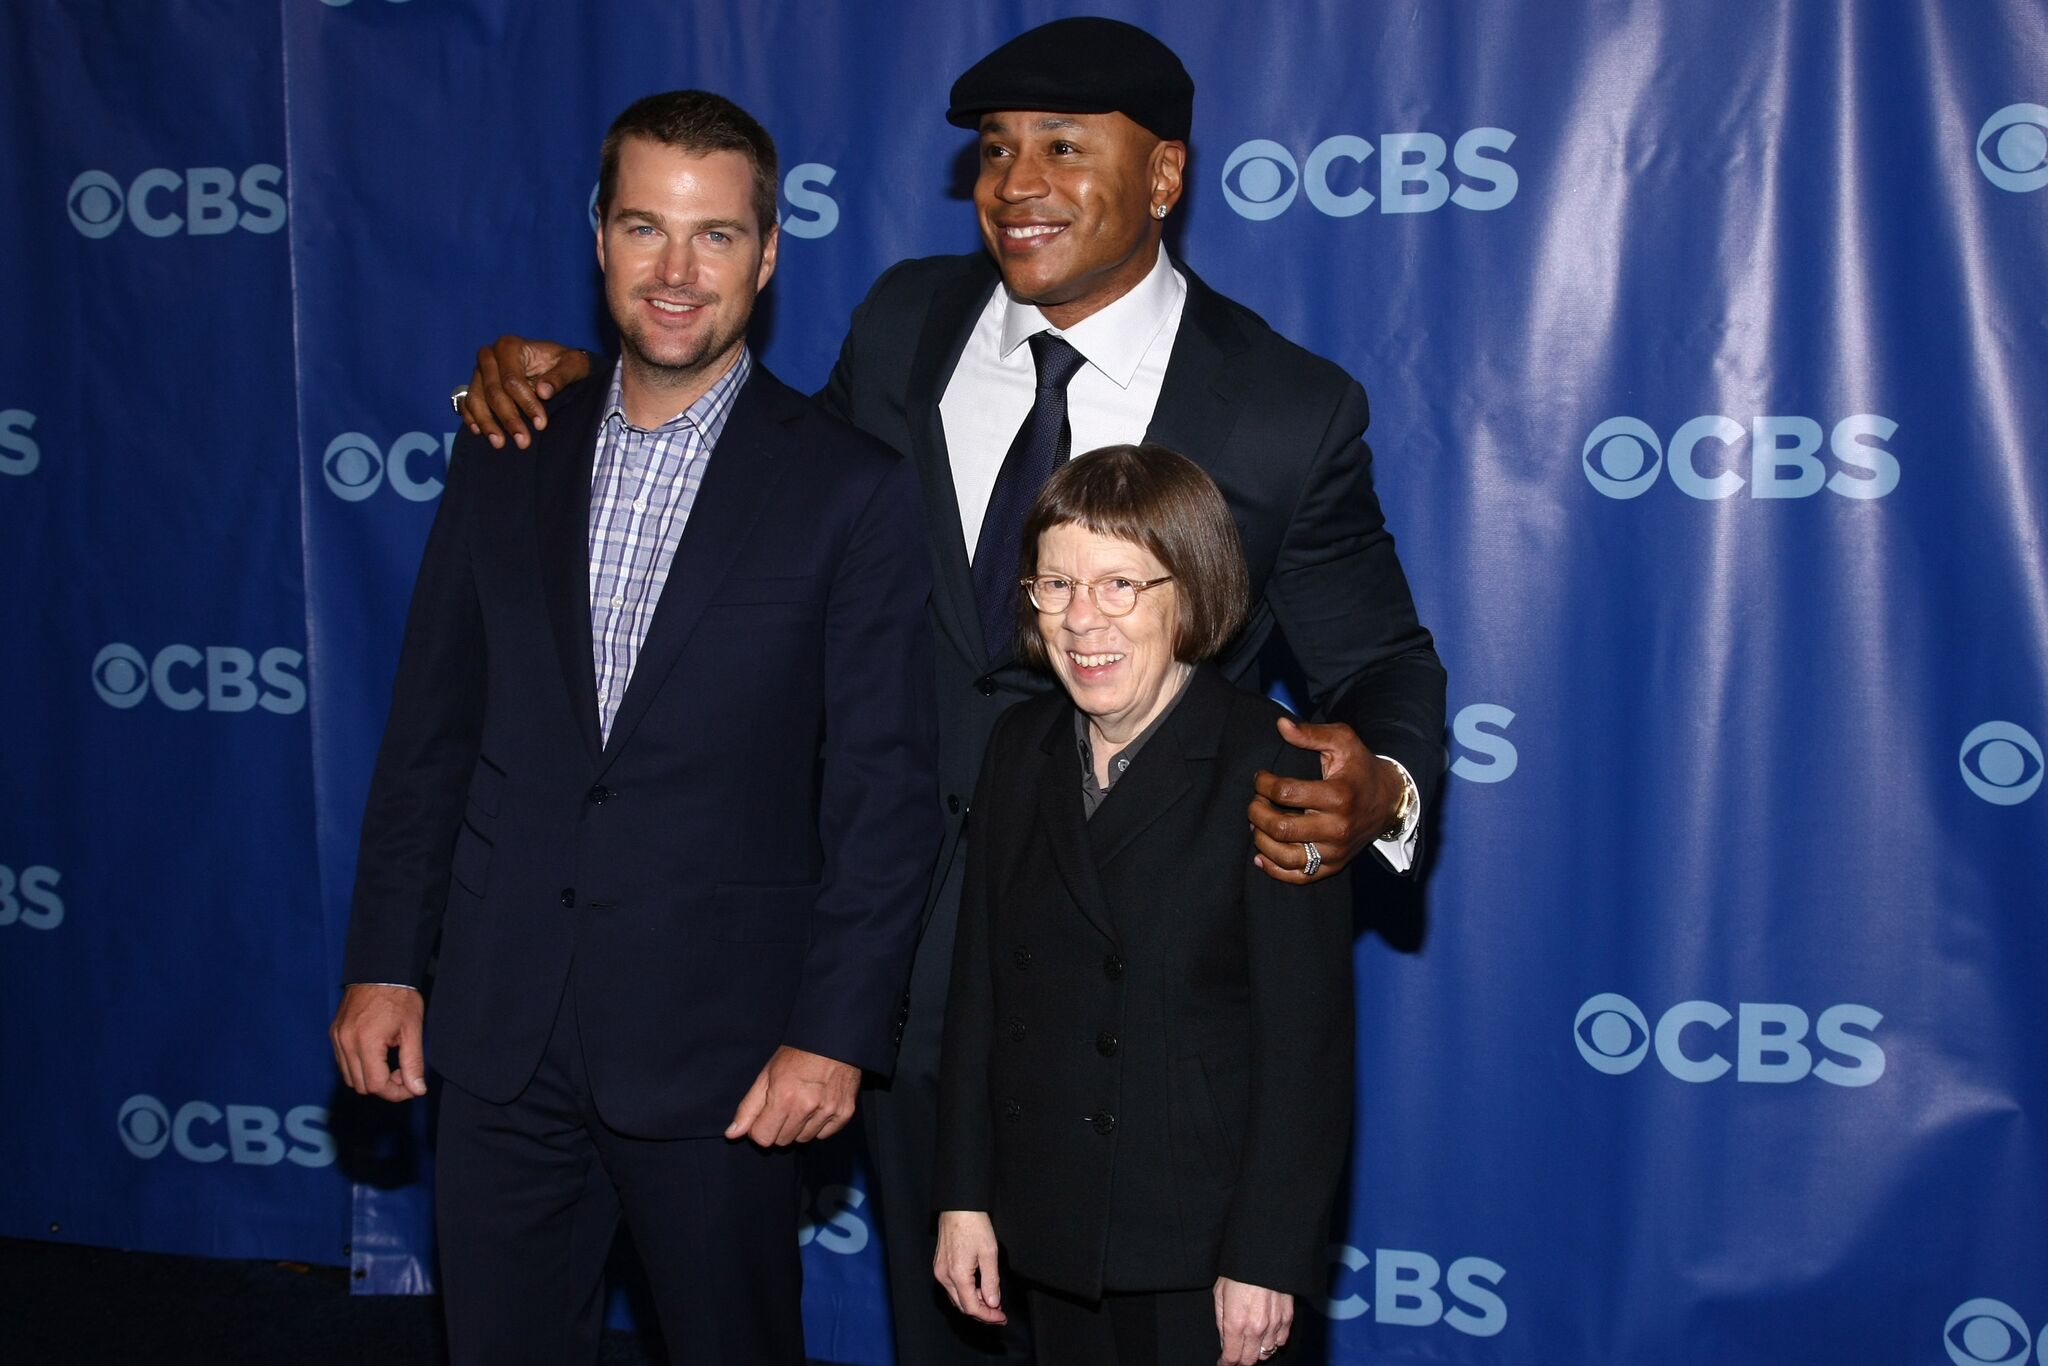 Chris O'Donnell, LL Cool J and Linda Hunt at the 2011 CBS Upfront at The Tent  | Getty Images